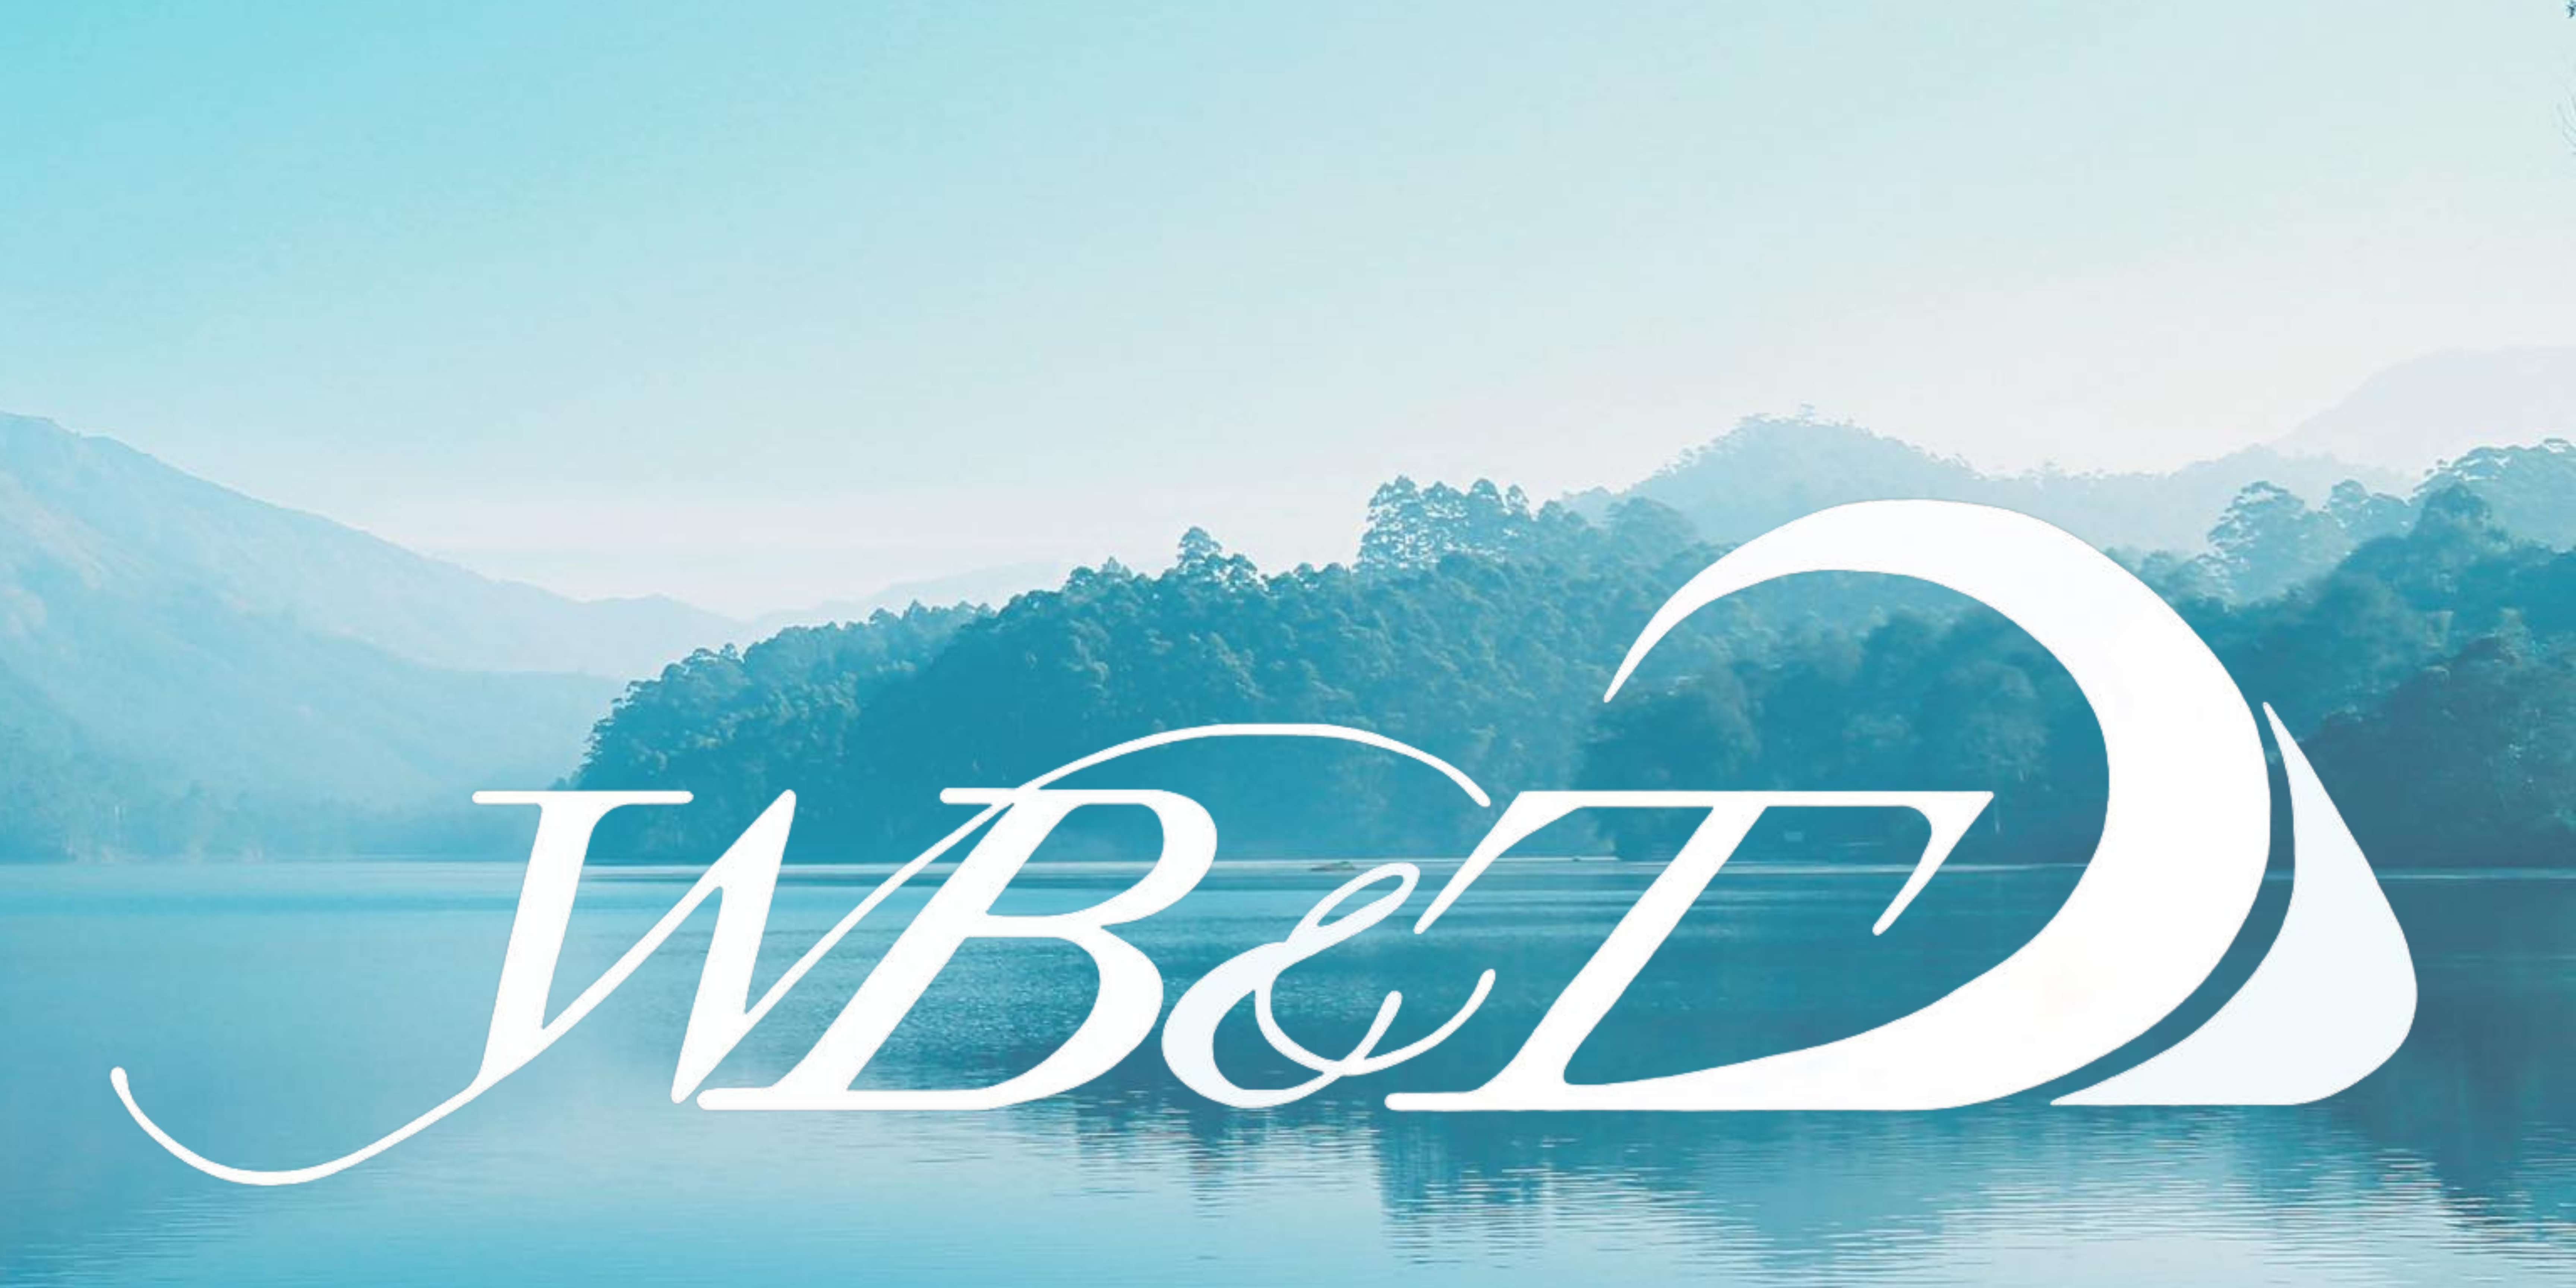 A website banner with a landscape background showing a lake, mountains, and trees. Overlayed is the Wateree Business & Tax logo, a large, stylized WB&T. 